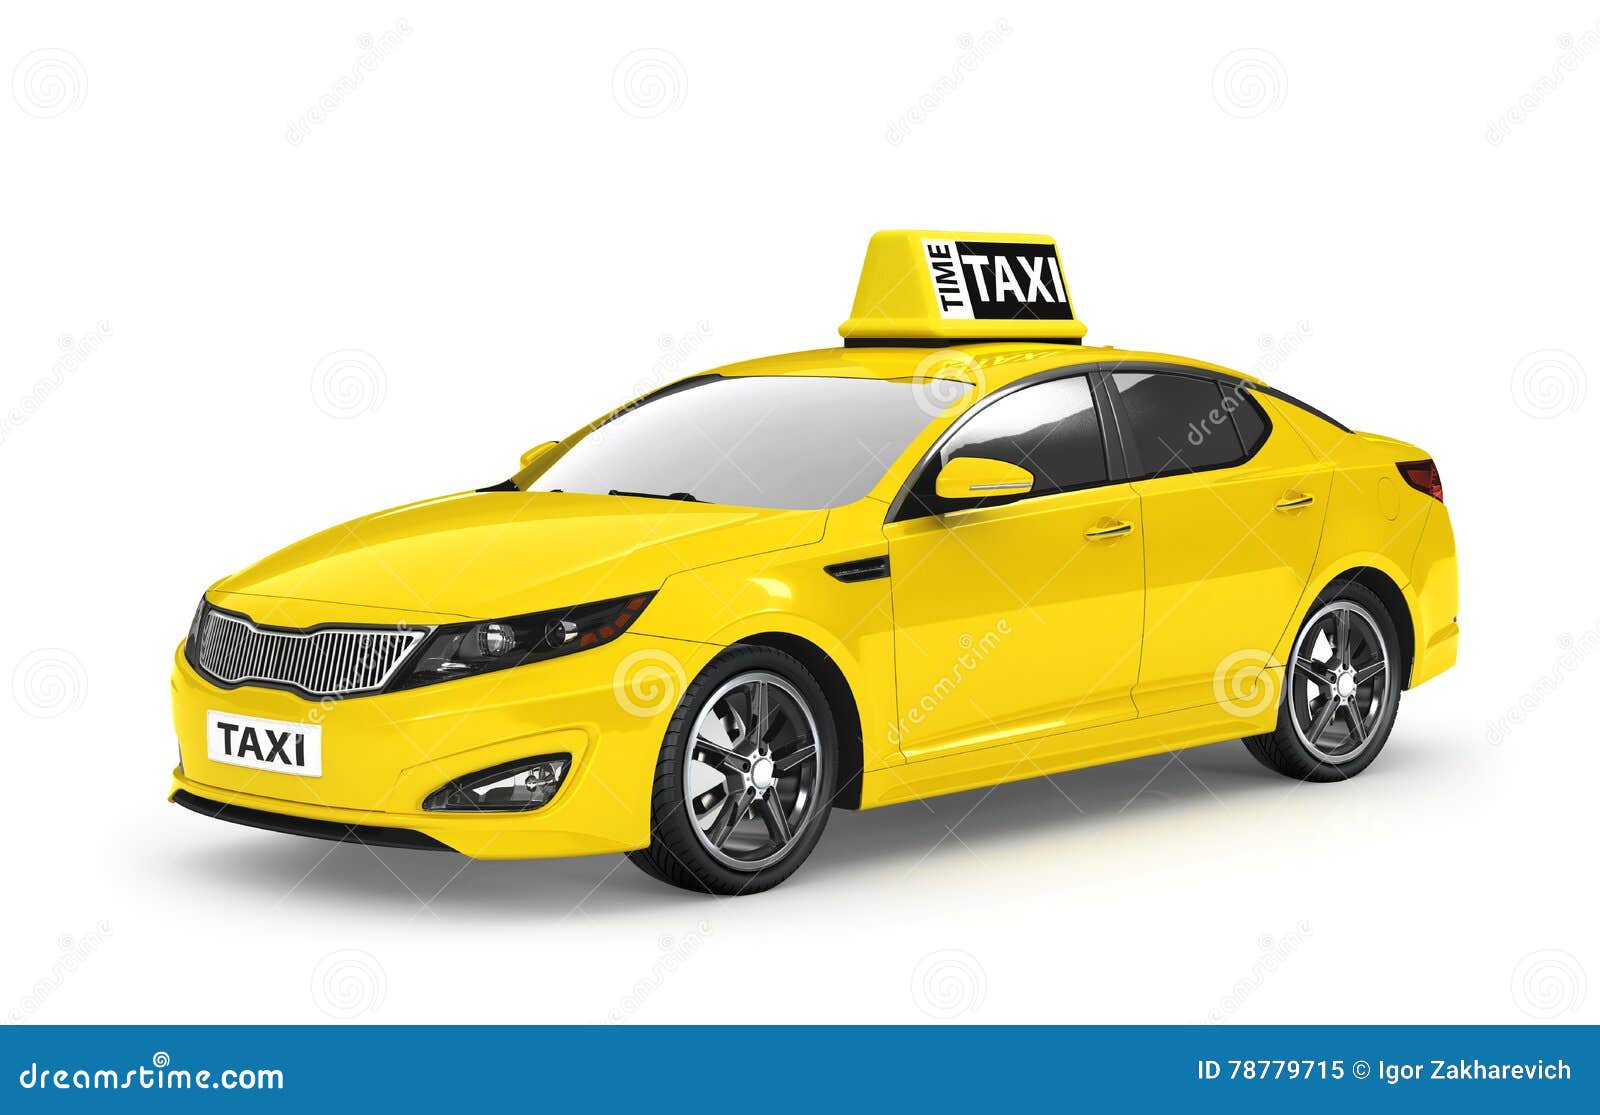 Taxi Wallpapers (47+ images inside)